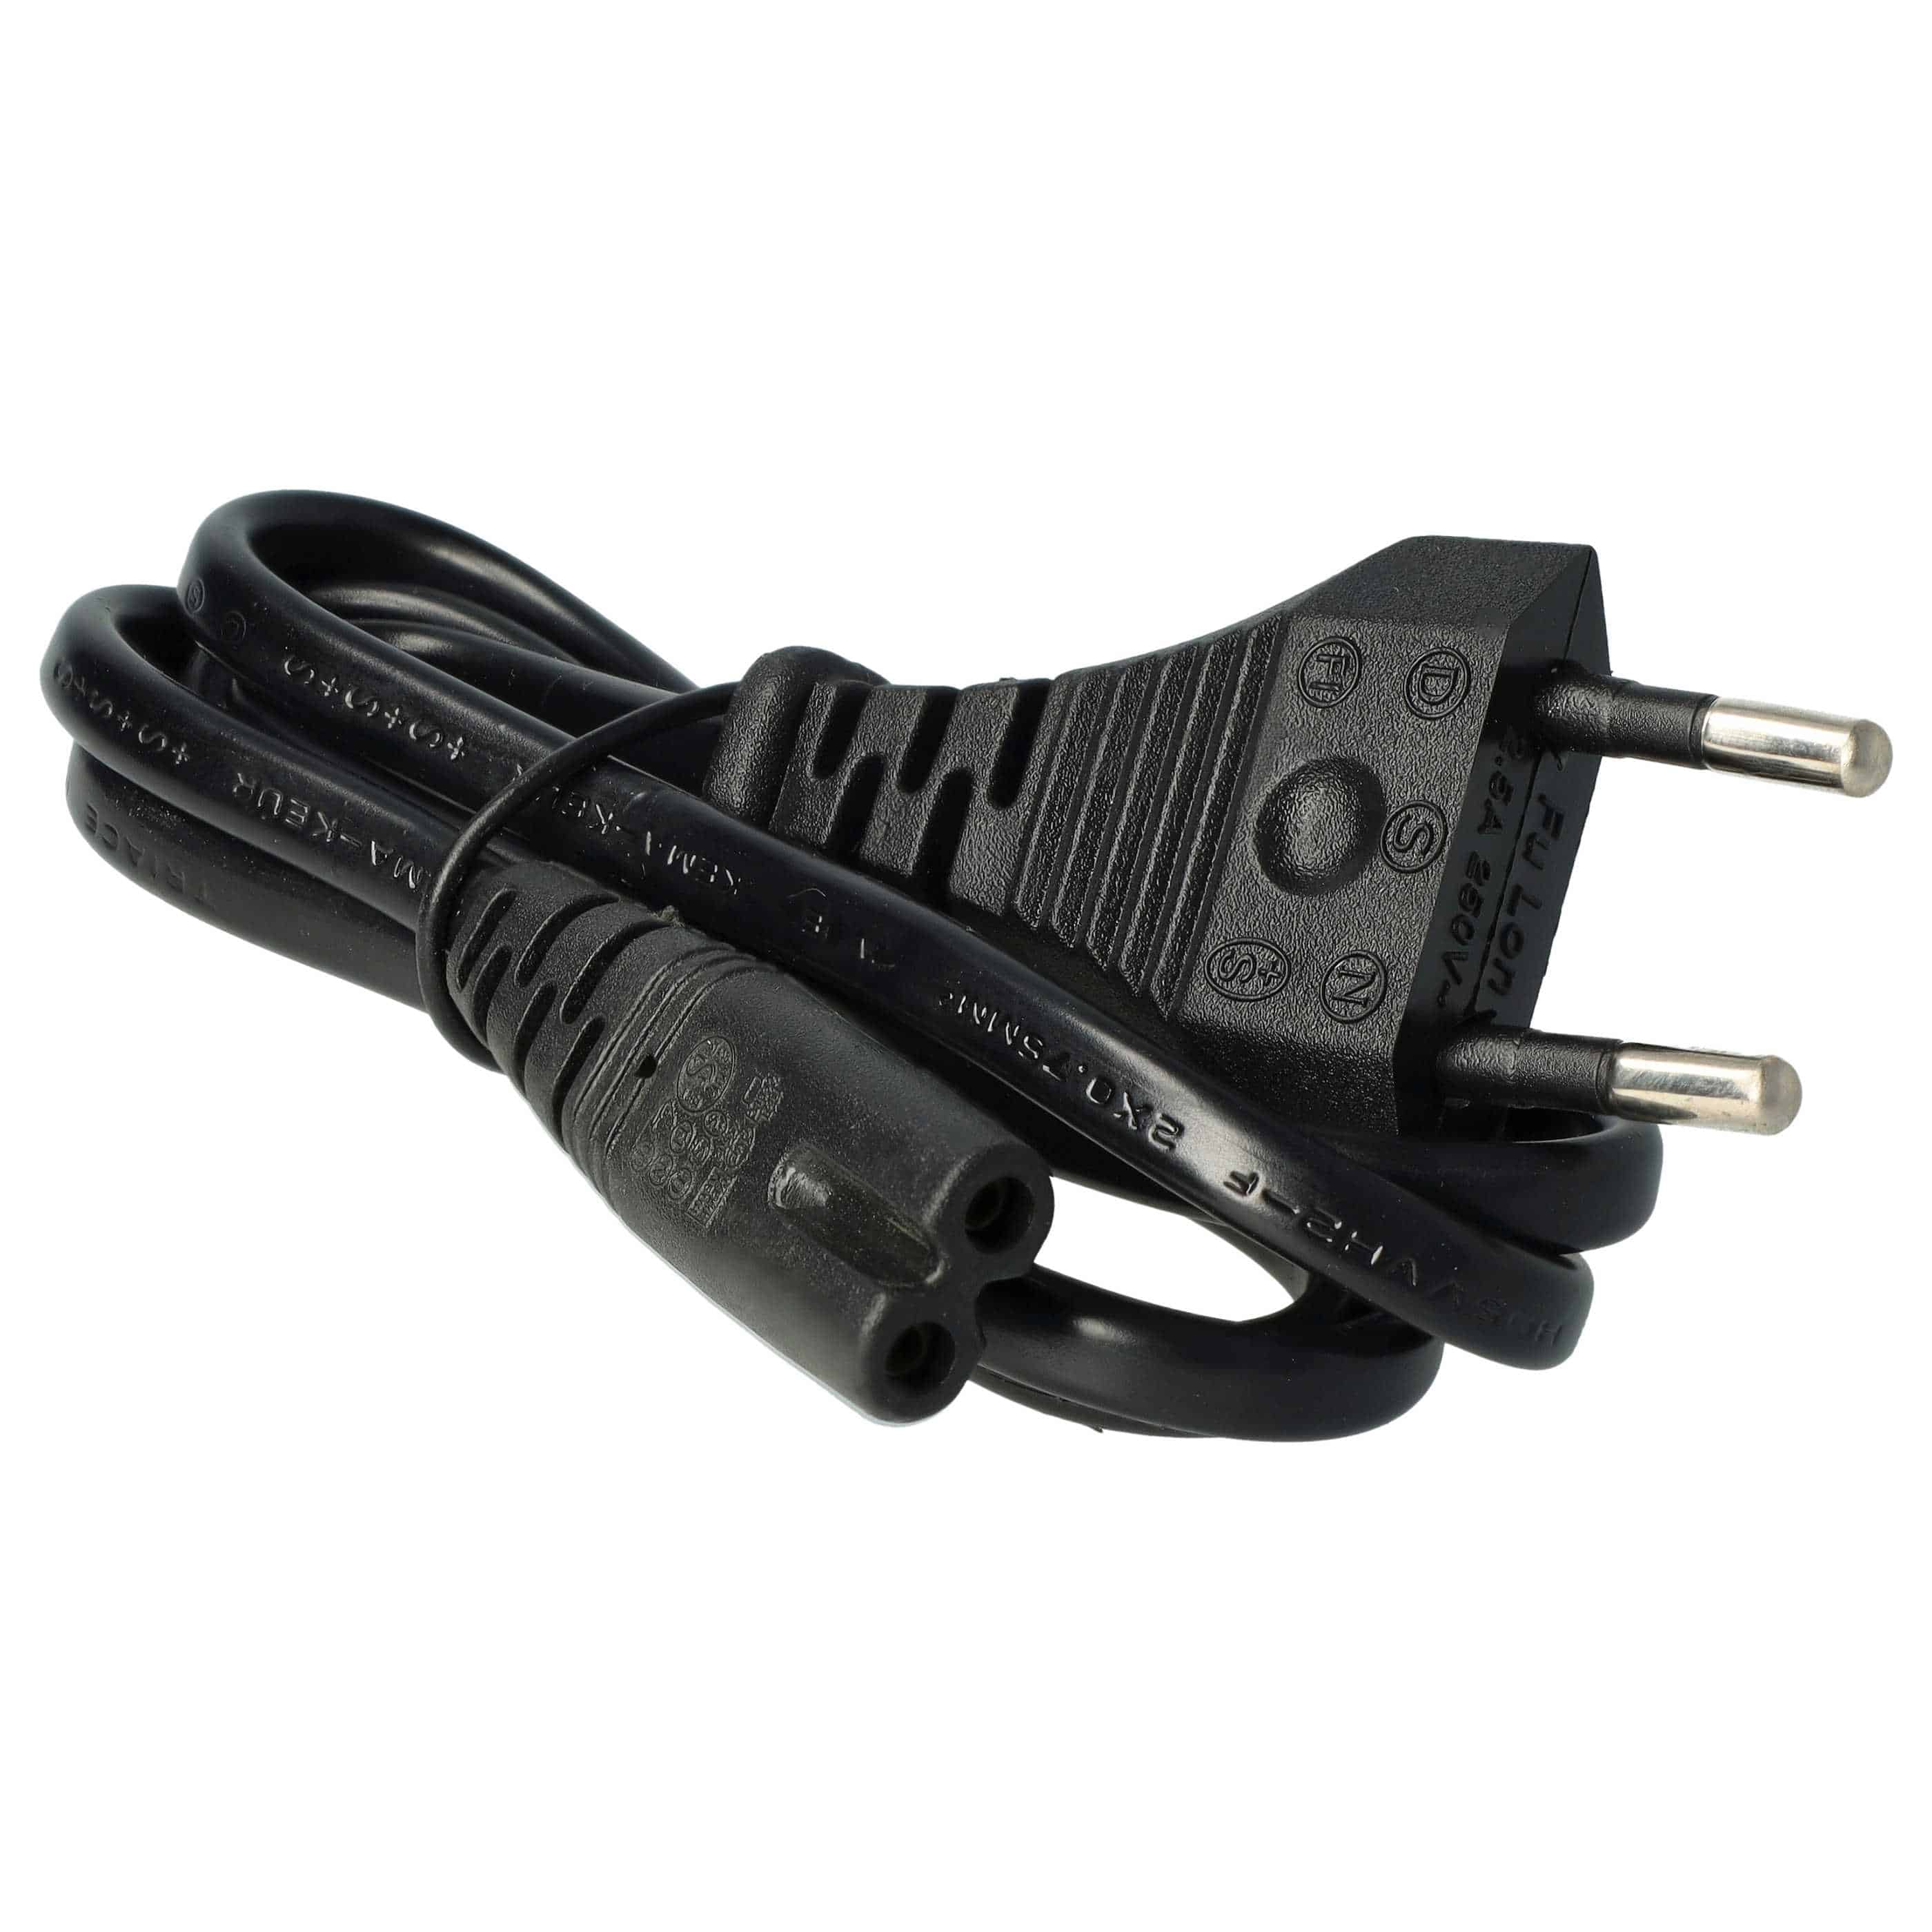 Mains Power Adapter replaces Asus 0A001-00342500, 01A001-0342100, 0A001-00342900 for AsusNotebook, 33 W